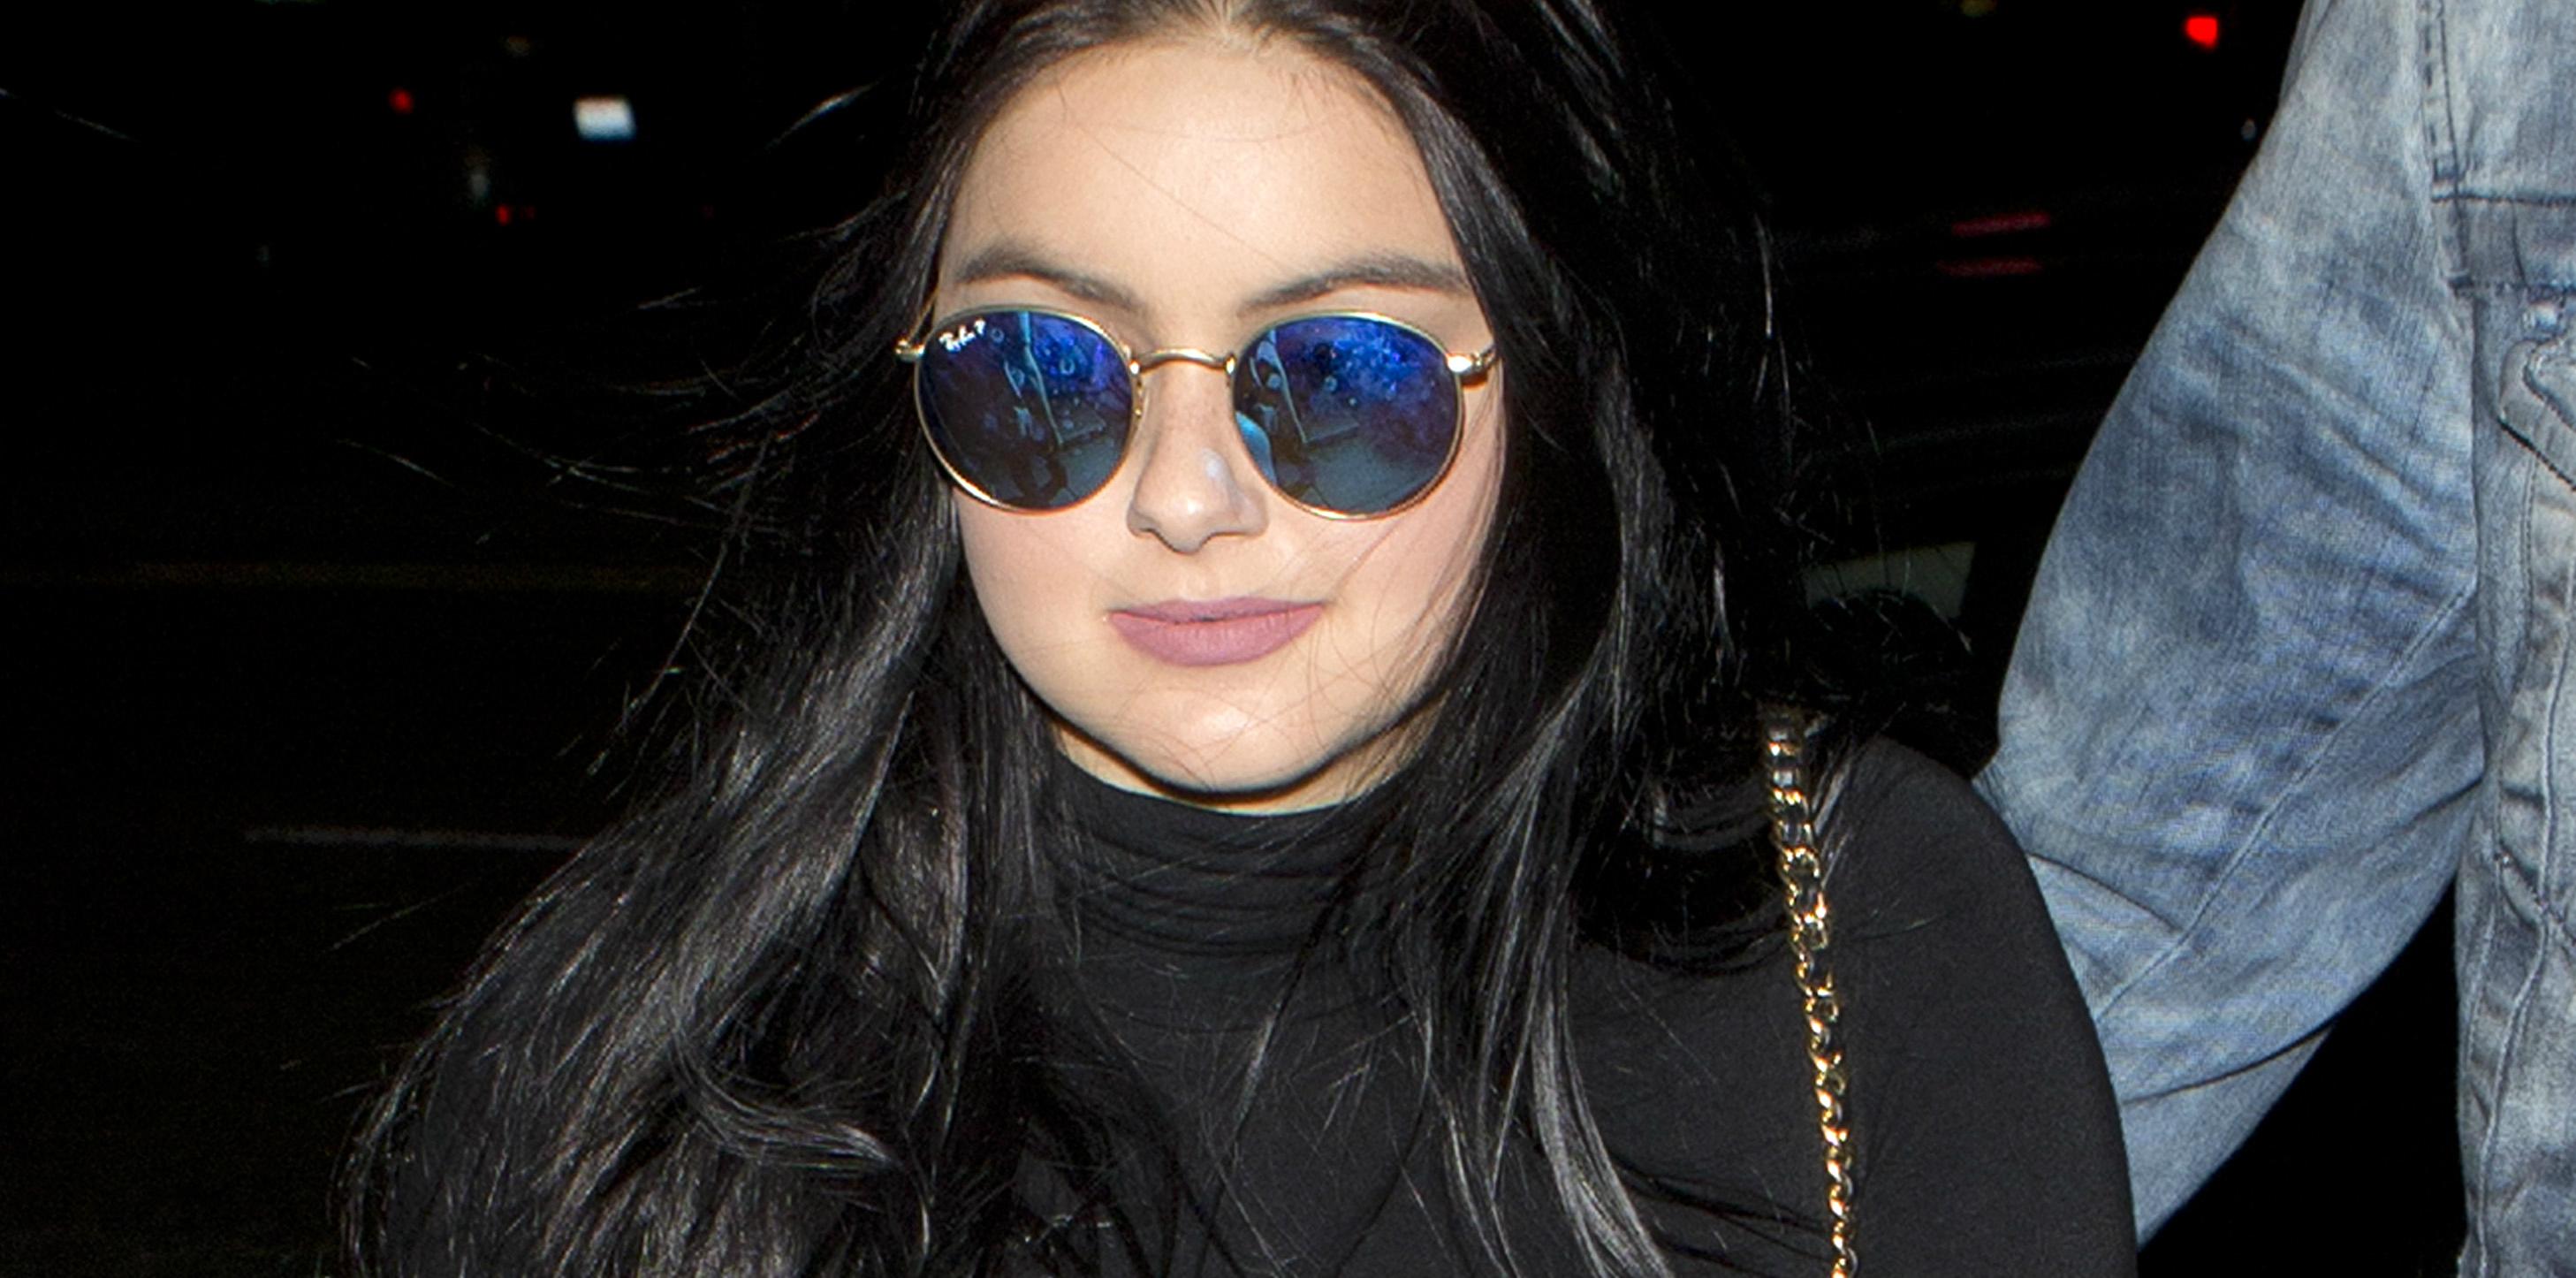 BOOBS & BUTT! Ariel Winter Let's it All Hang Out In Her Most Racy